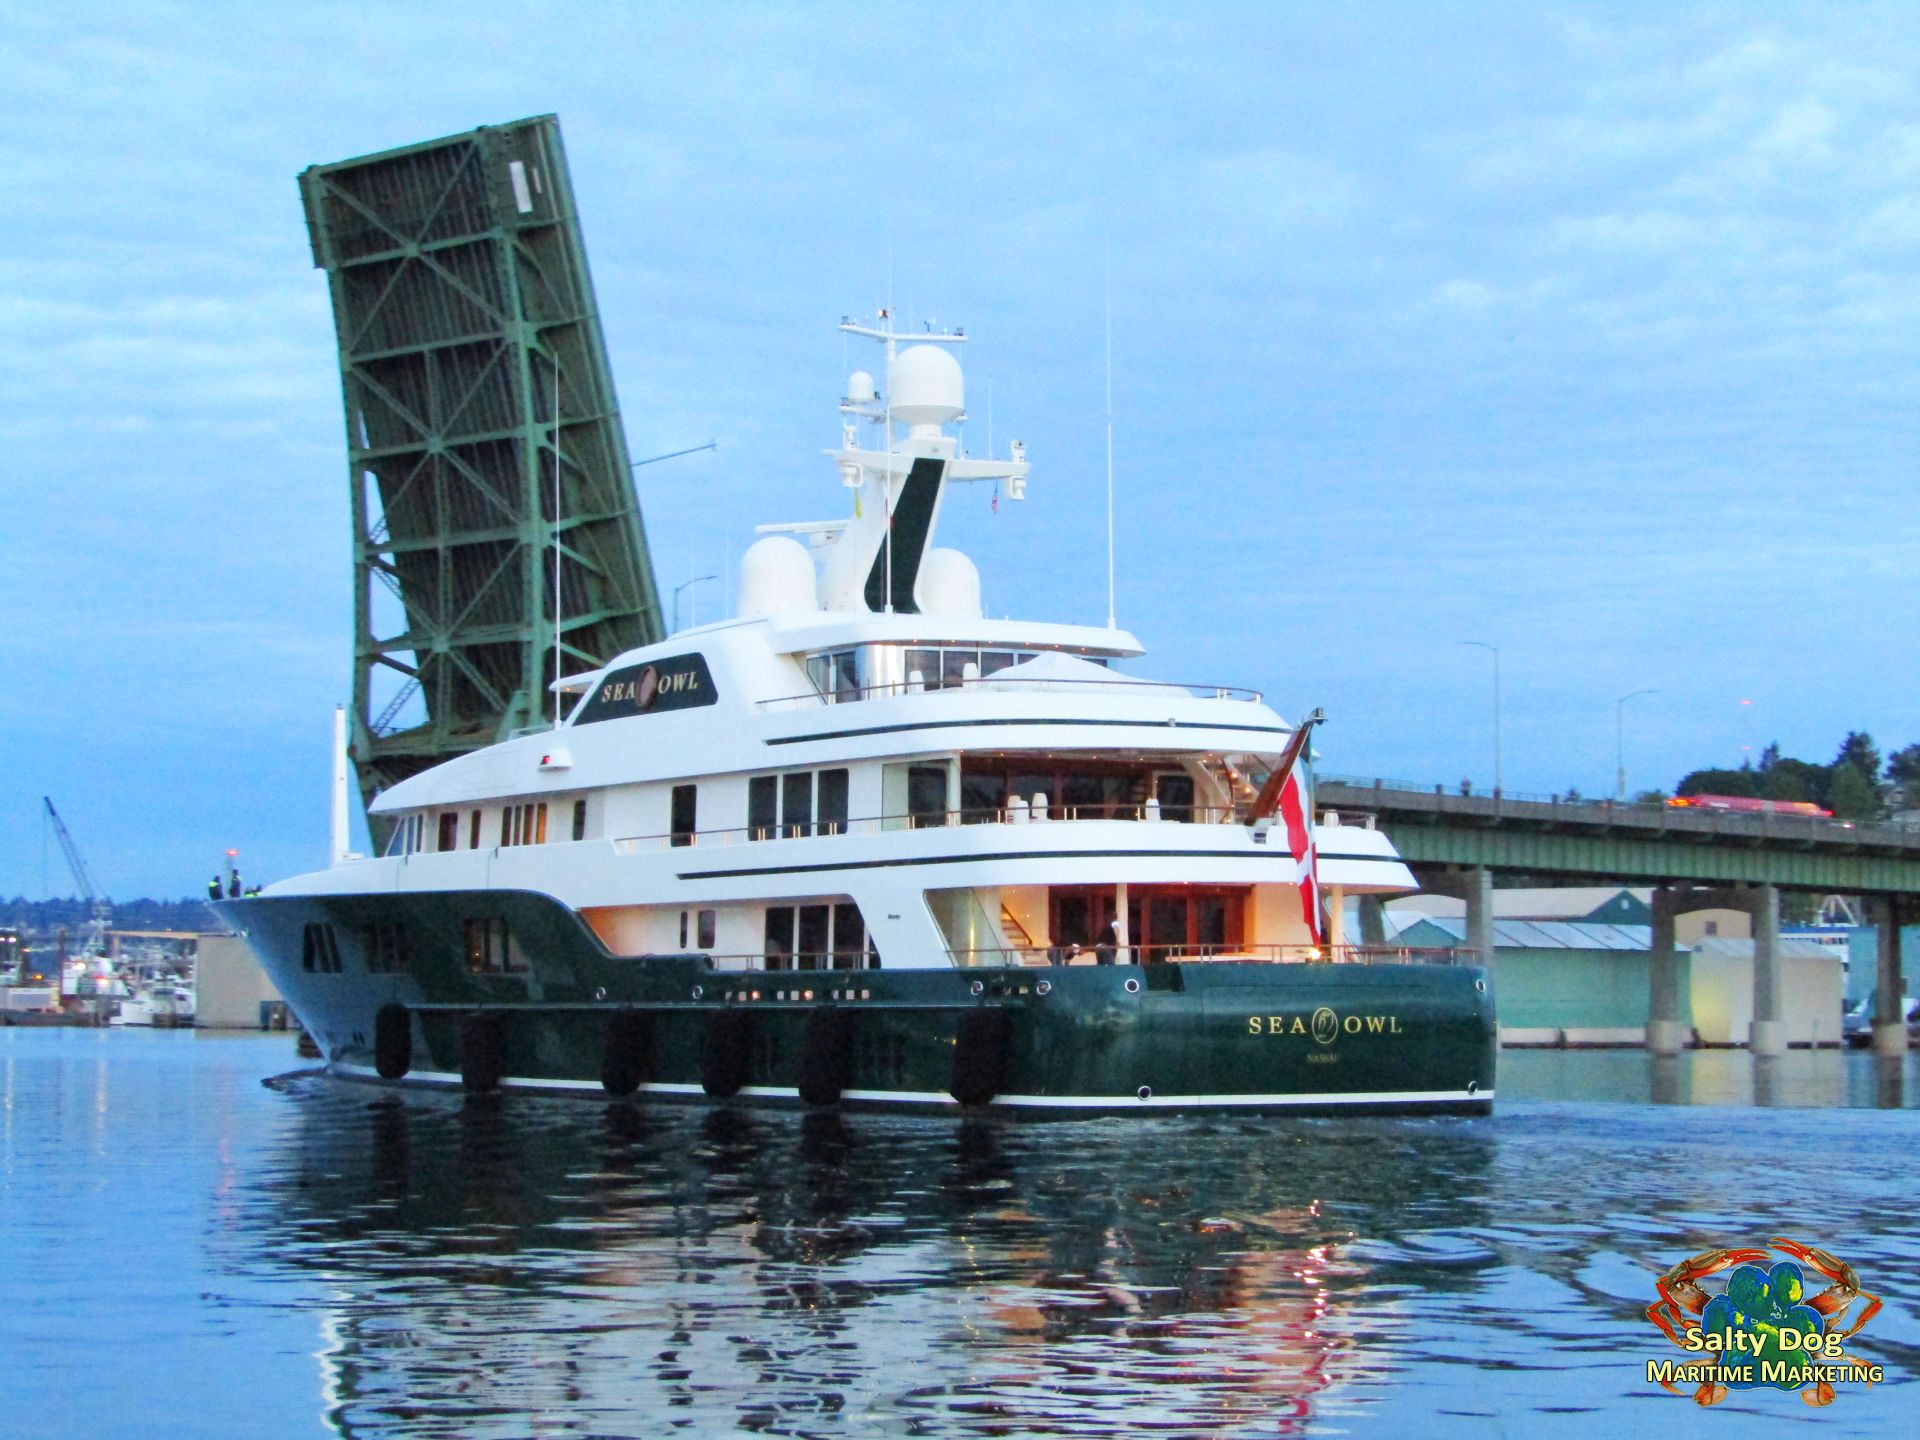 who owns the sea owl yacht